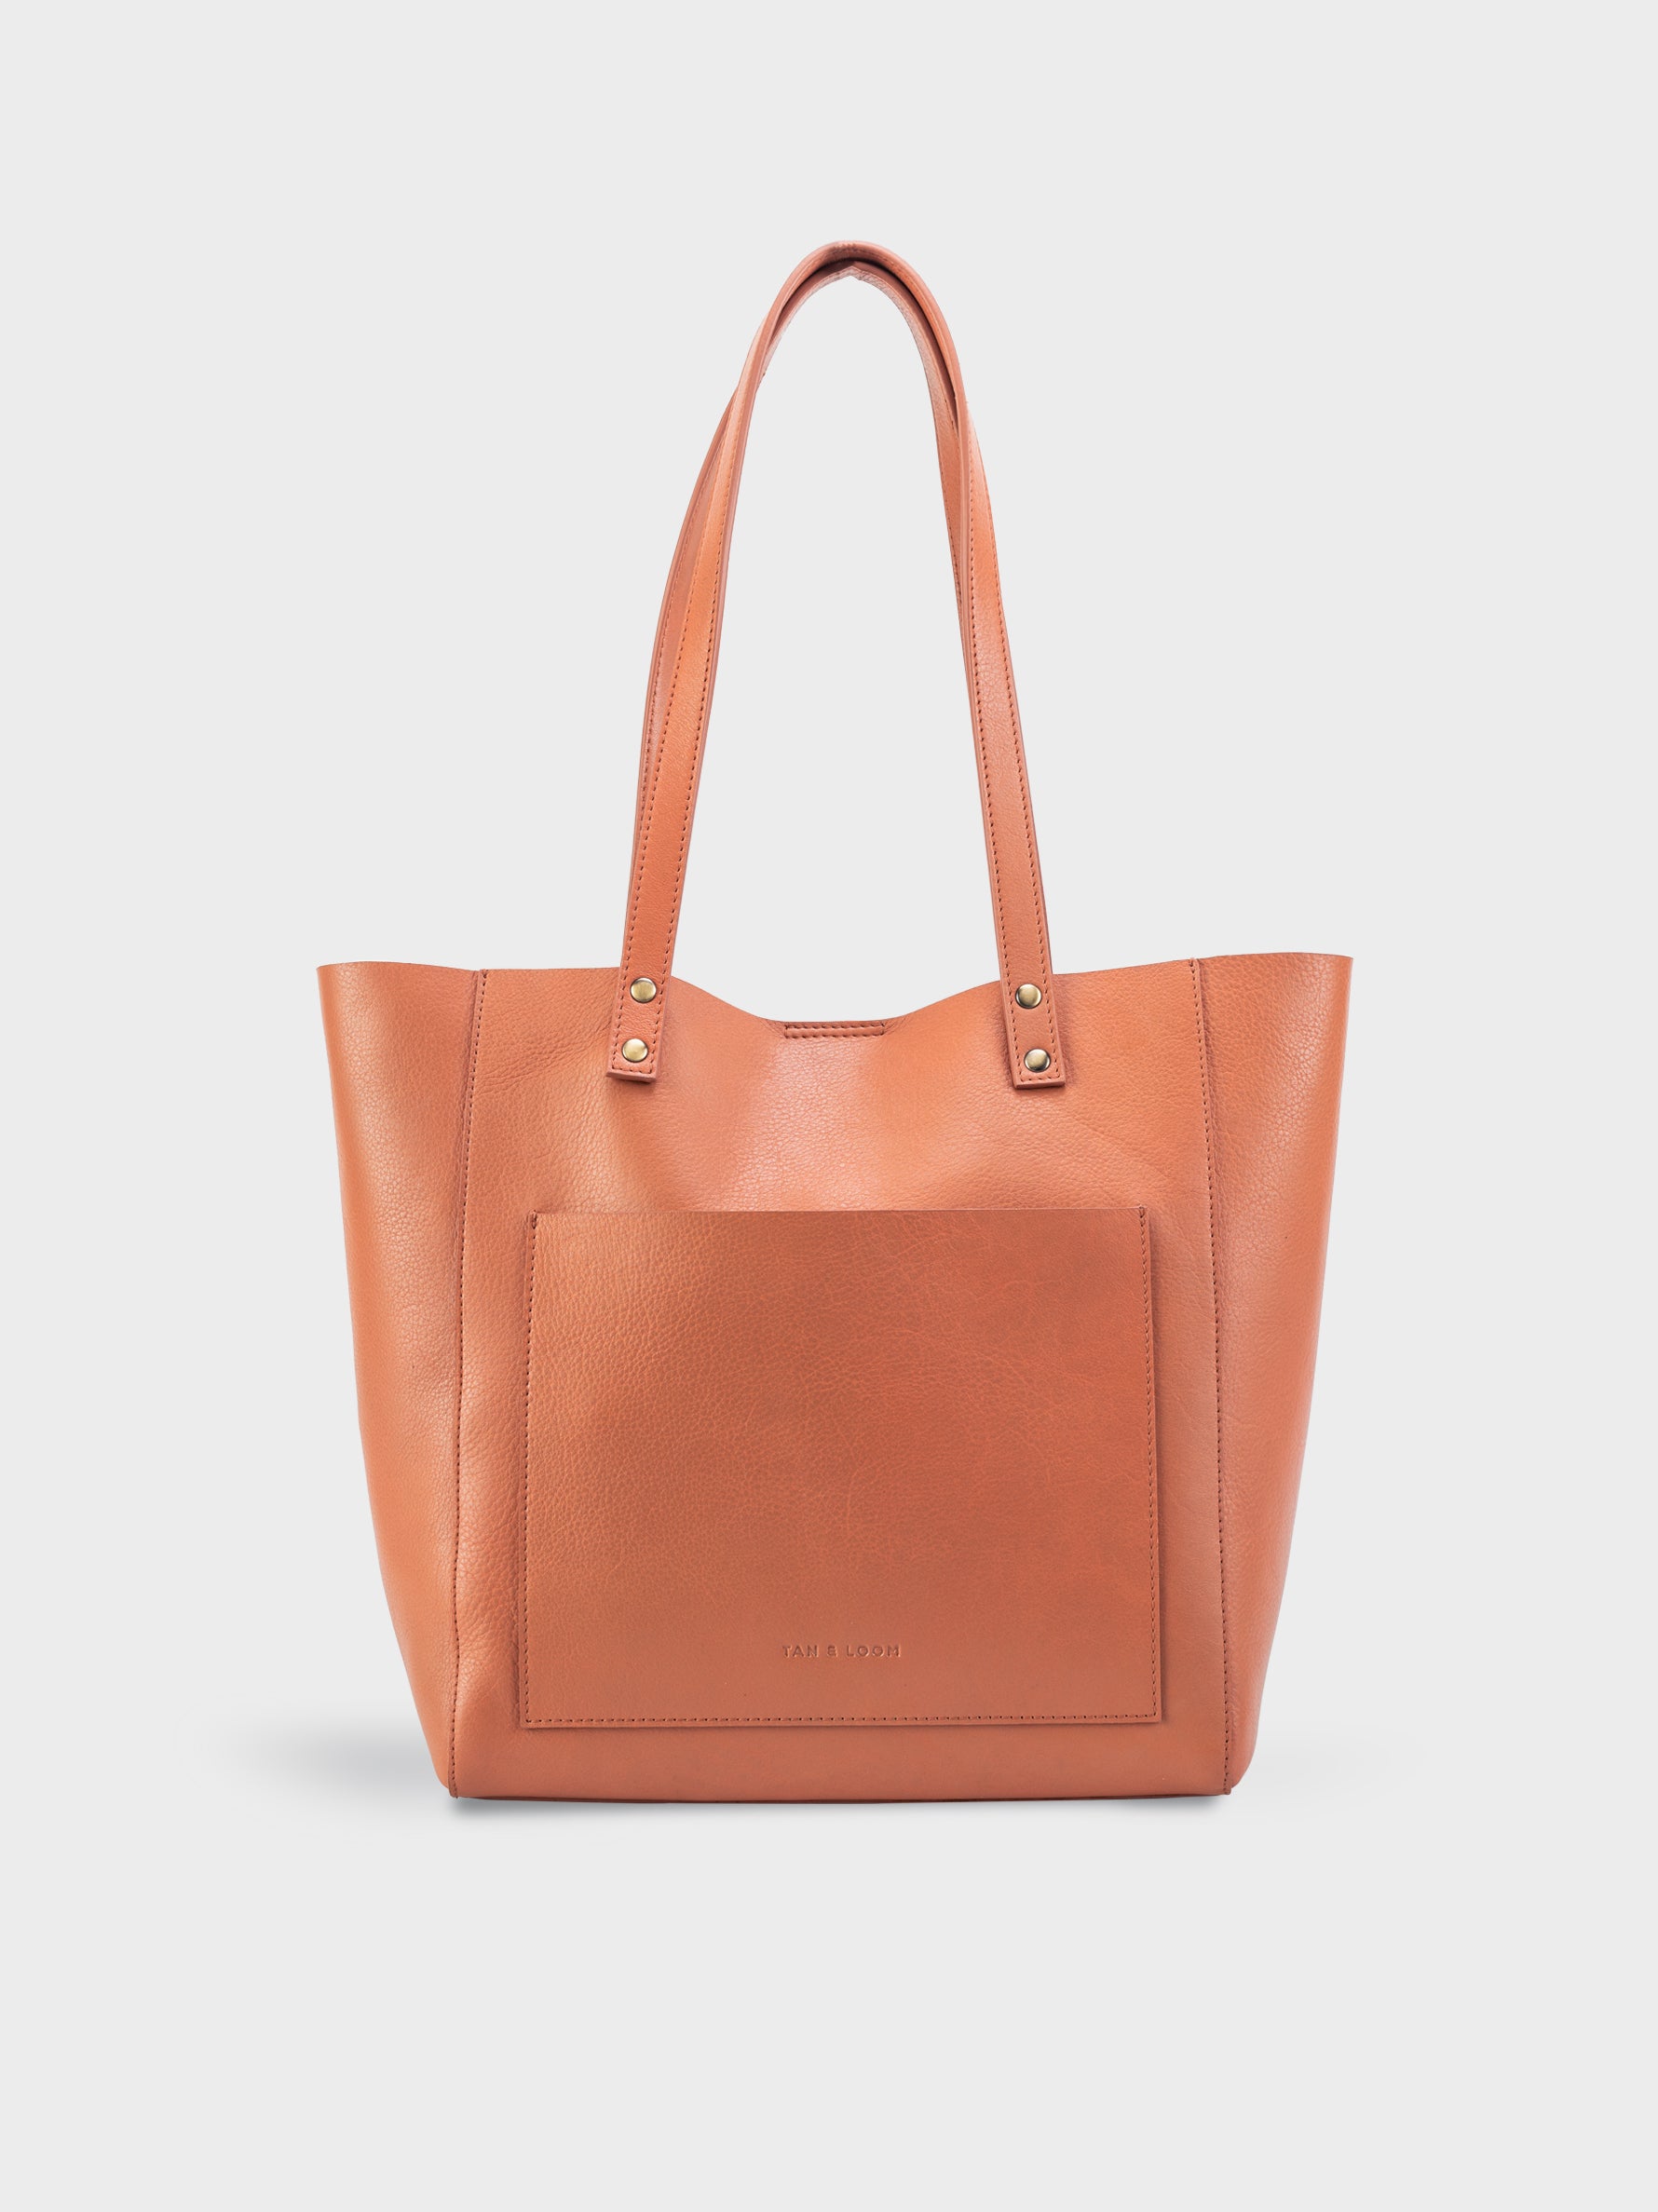 Handcrafted Genuine Vegetable Tanned Leather Old Fashioned Tote Regular Dusty Peach for Women Tan & Loom